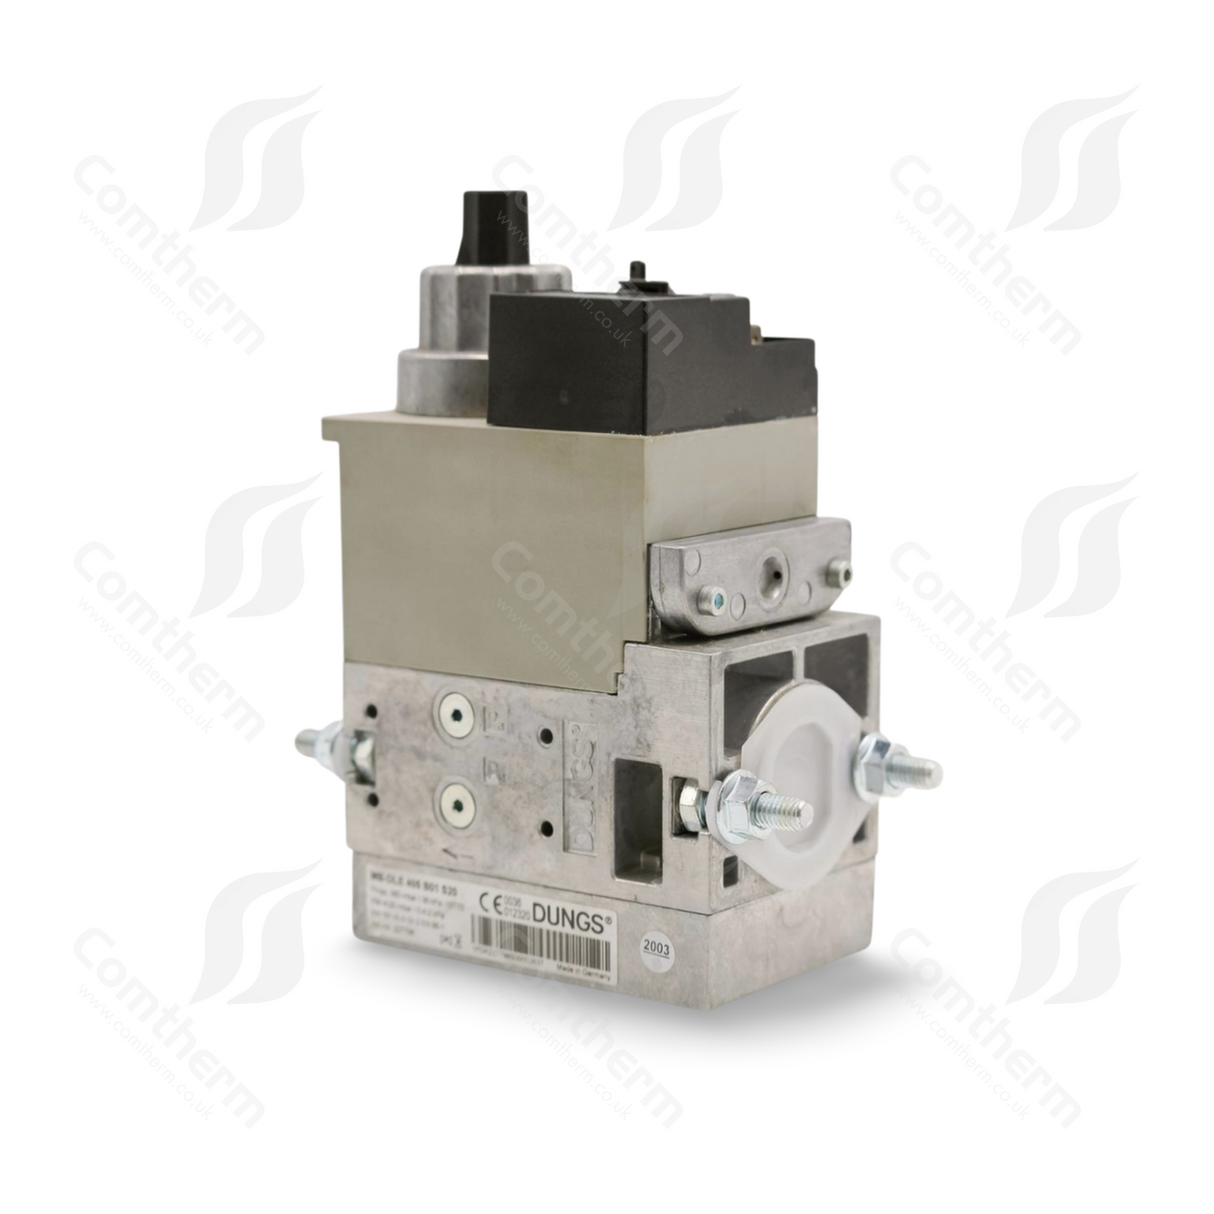 Dungs MB-DLE 407 B01 S20 Multibloc Gas Valve - 110v